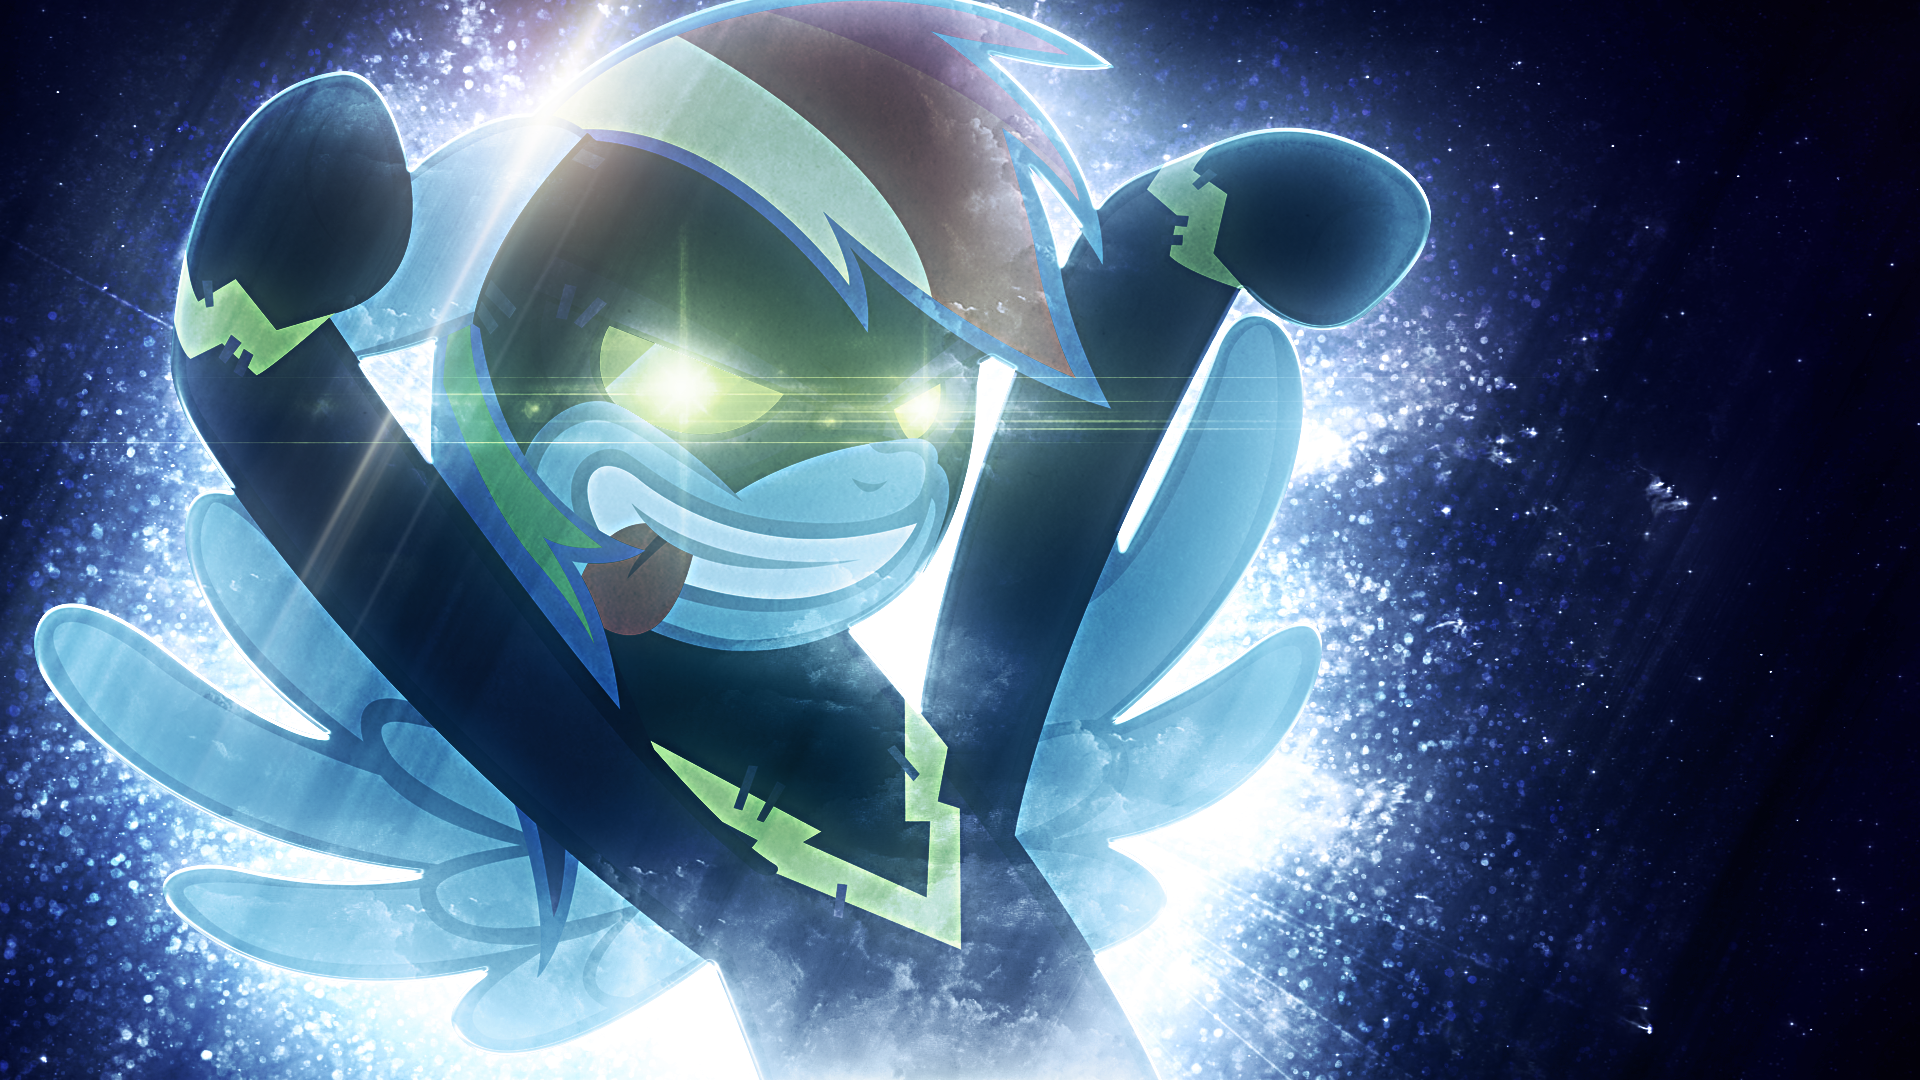 Shadowbolt Dash - Wallpaper [Request] by RainbowCrab and Tzolkine